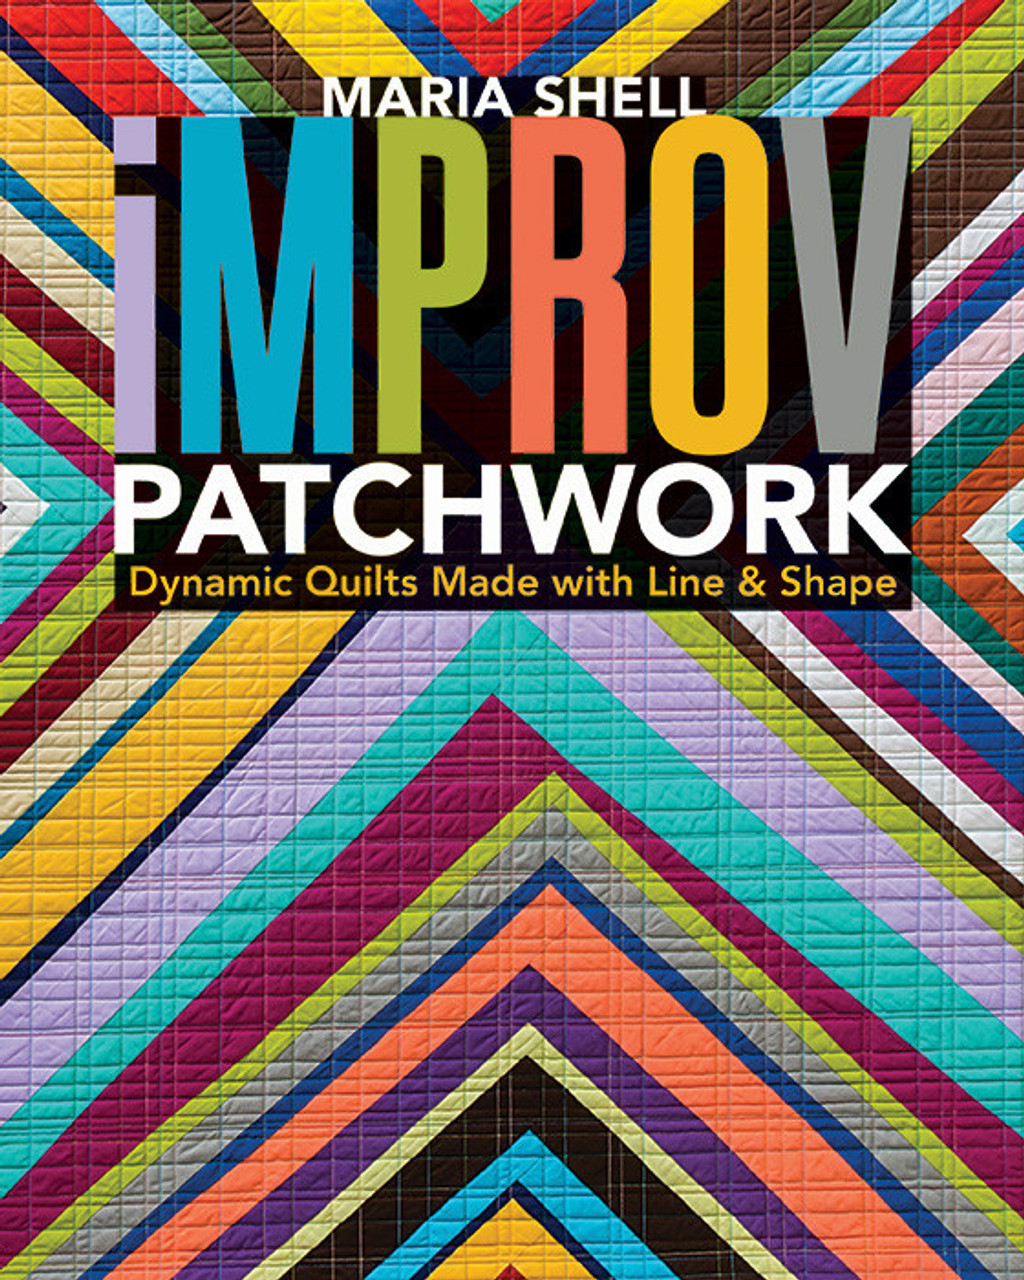 Improv Patchwork: Dynamic Quilts Made & Shell Line Maria Shape with by